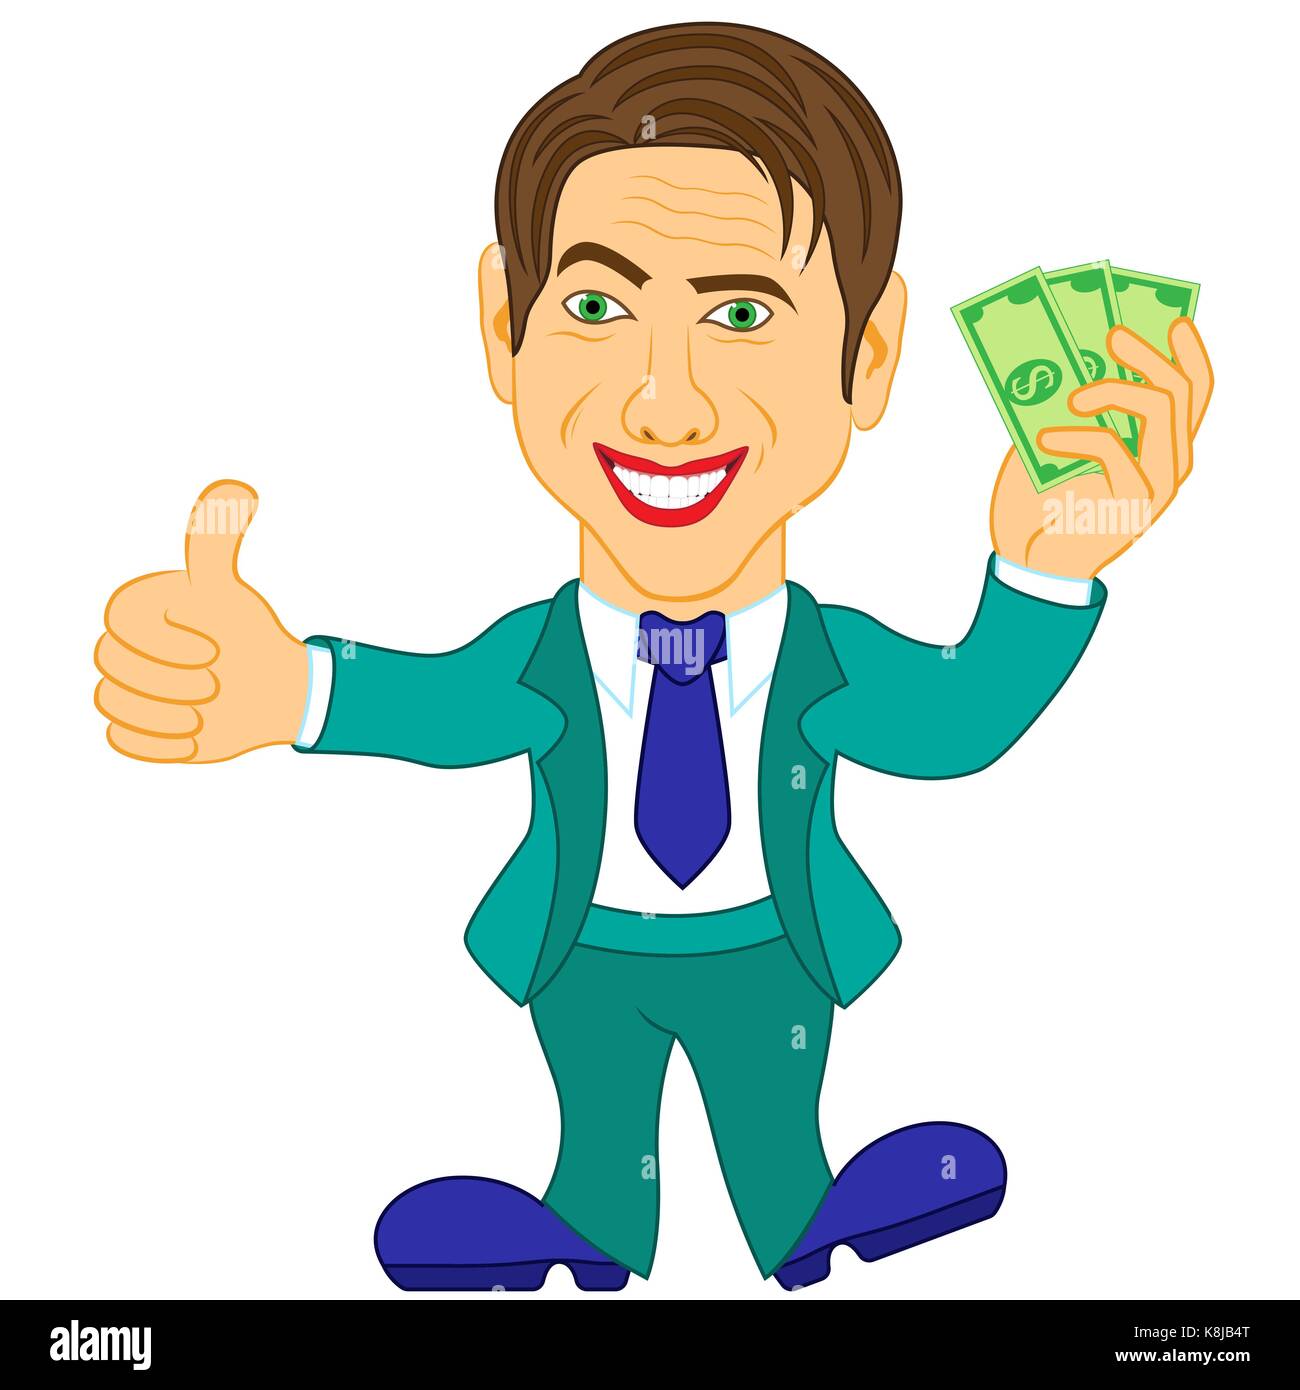 Smiling and joyful man in a turquoise suit holds the dollar bills, cartoon vector illustration Stock Vector